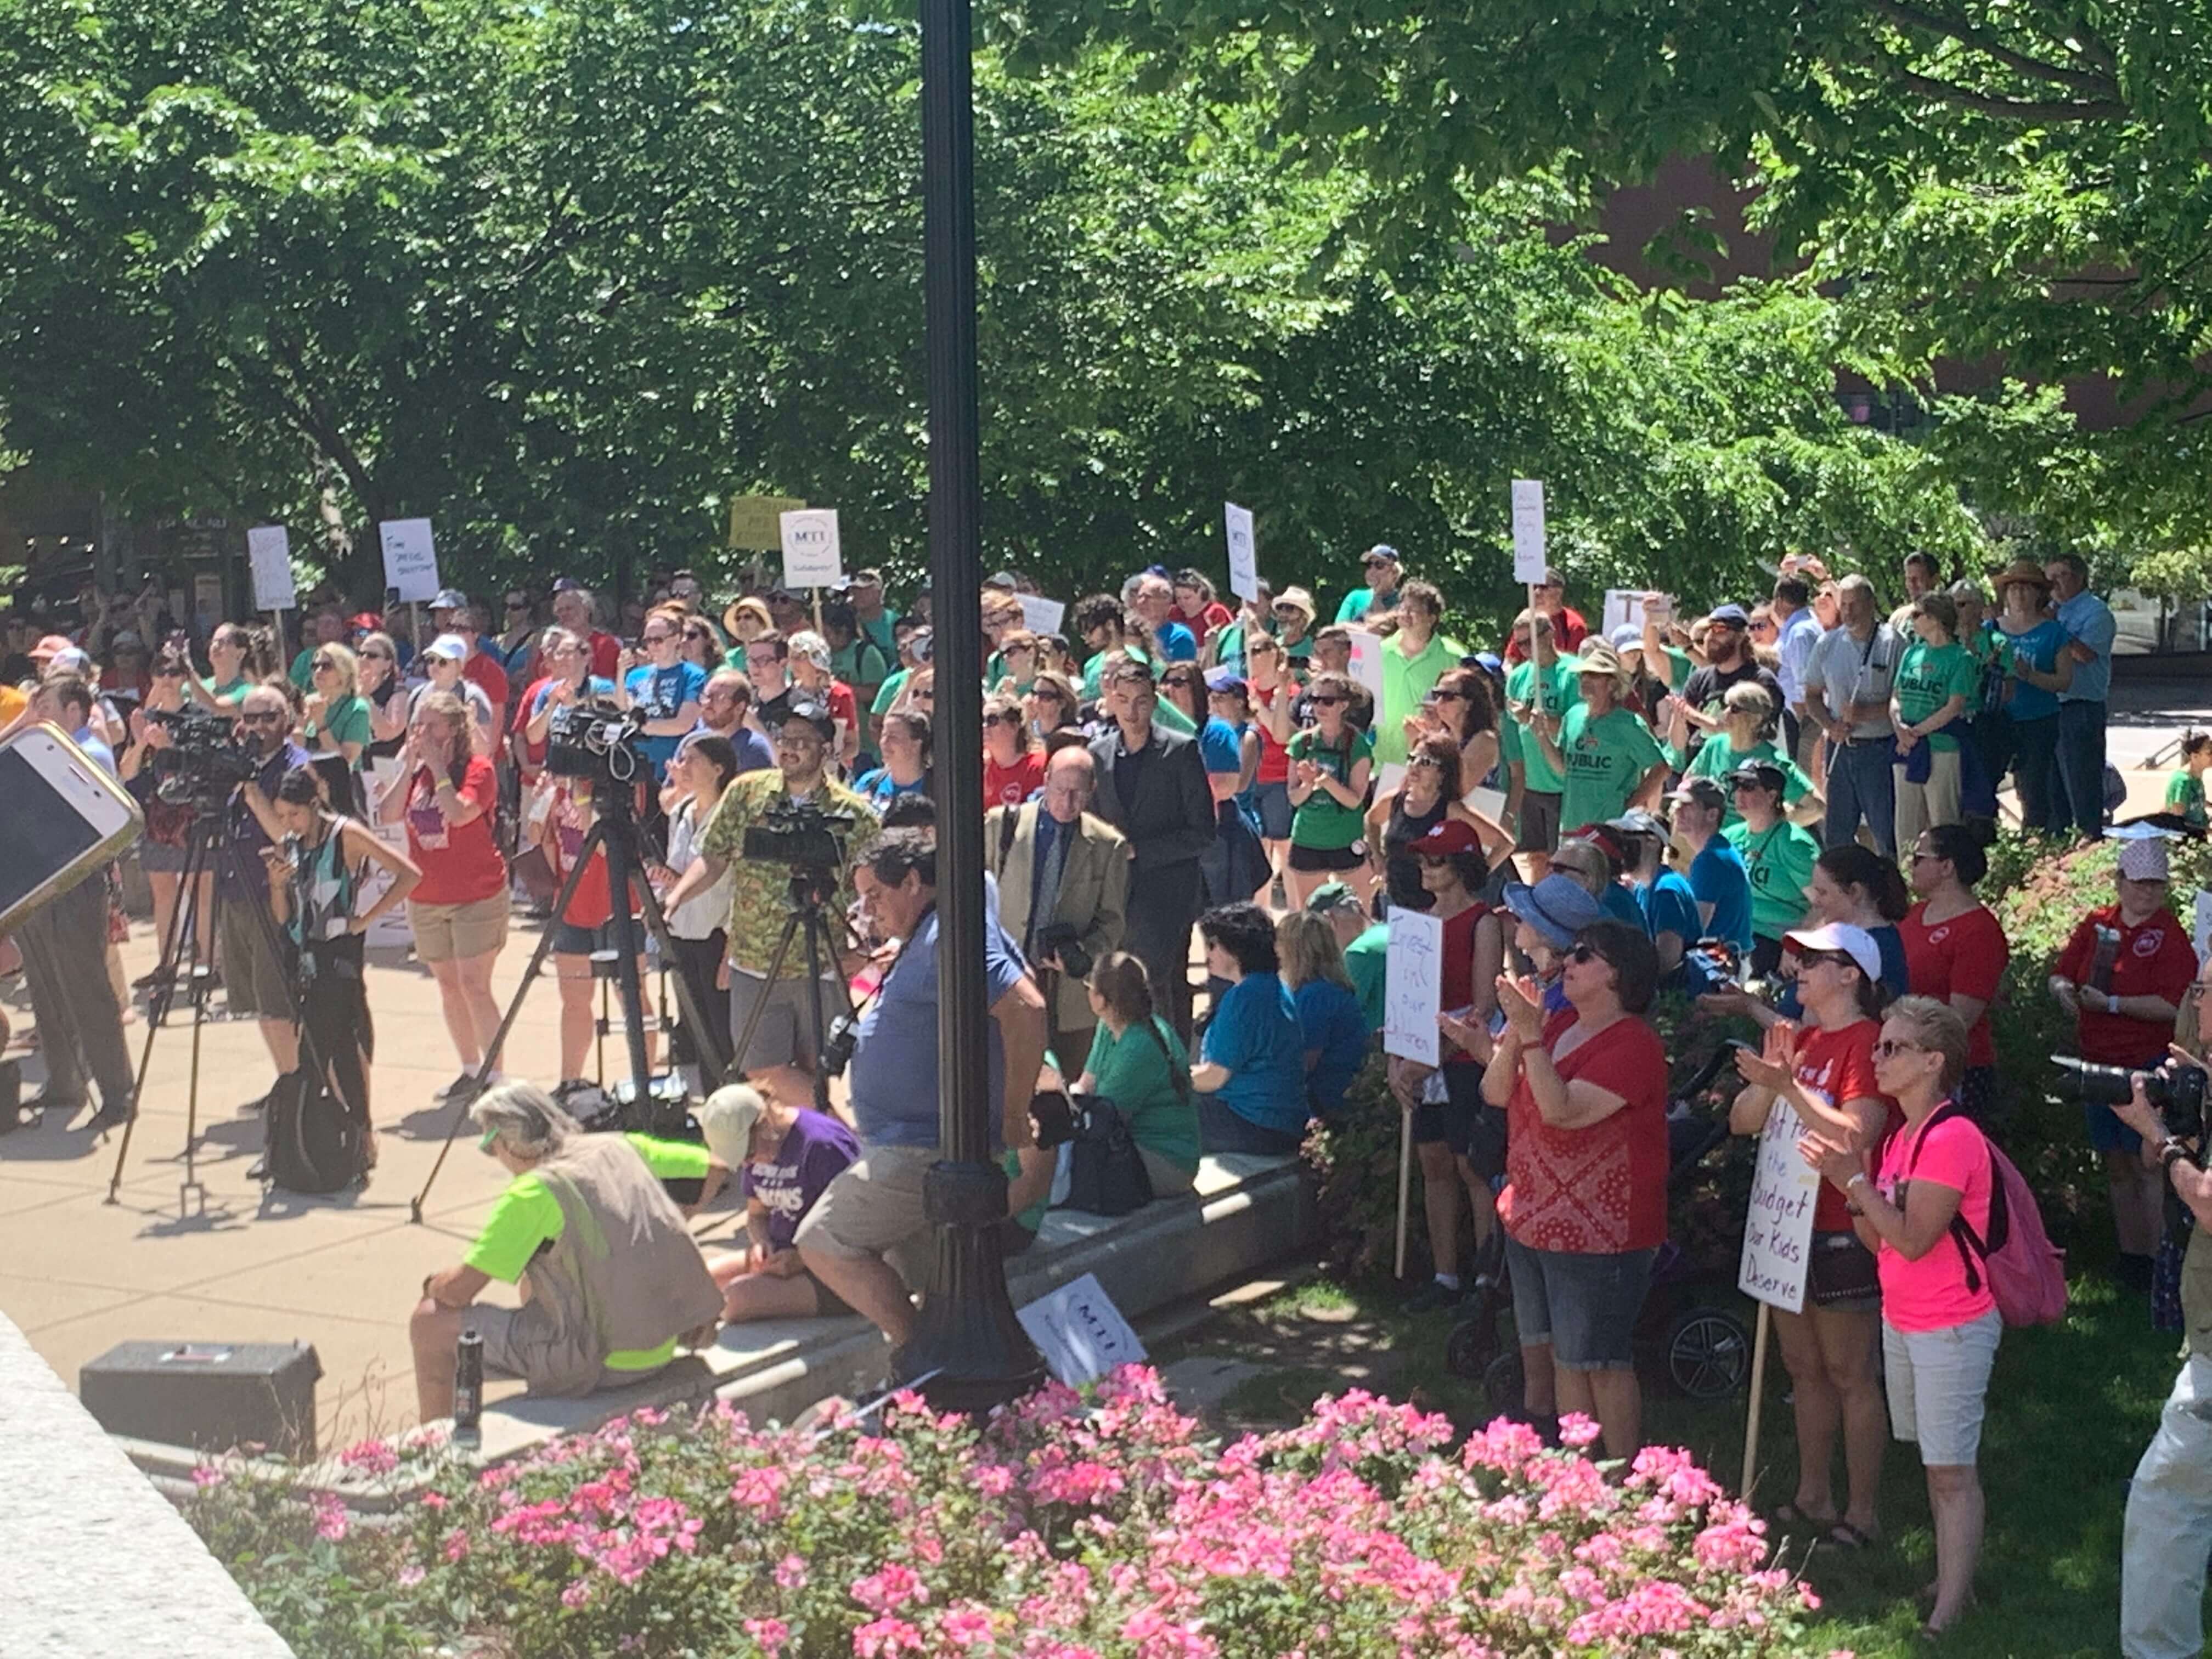 School Budget Advocates Conclude 60-Mile March for Increased School Funding